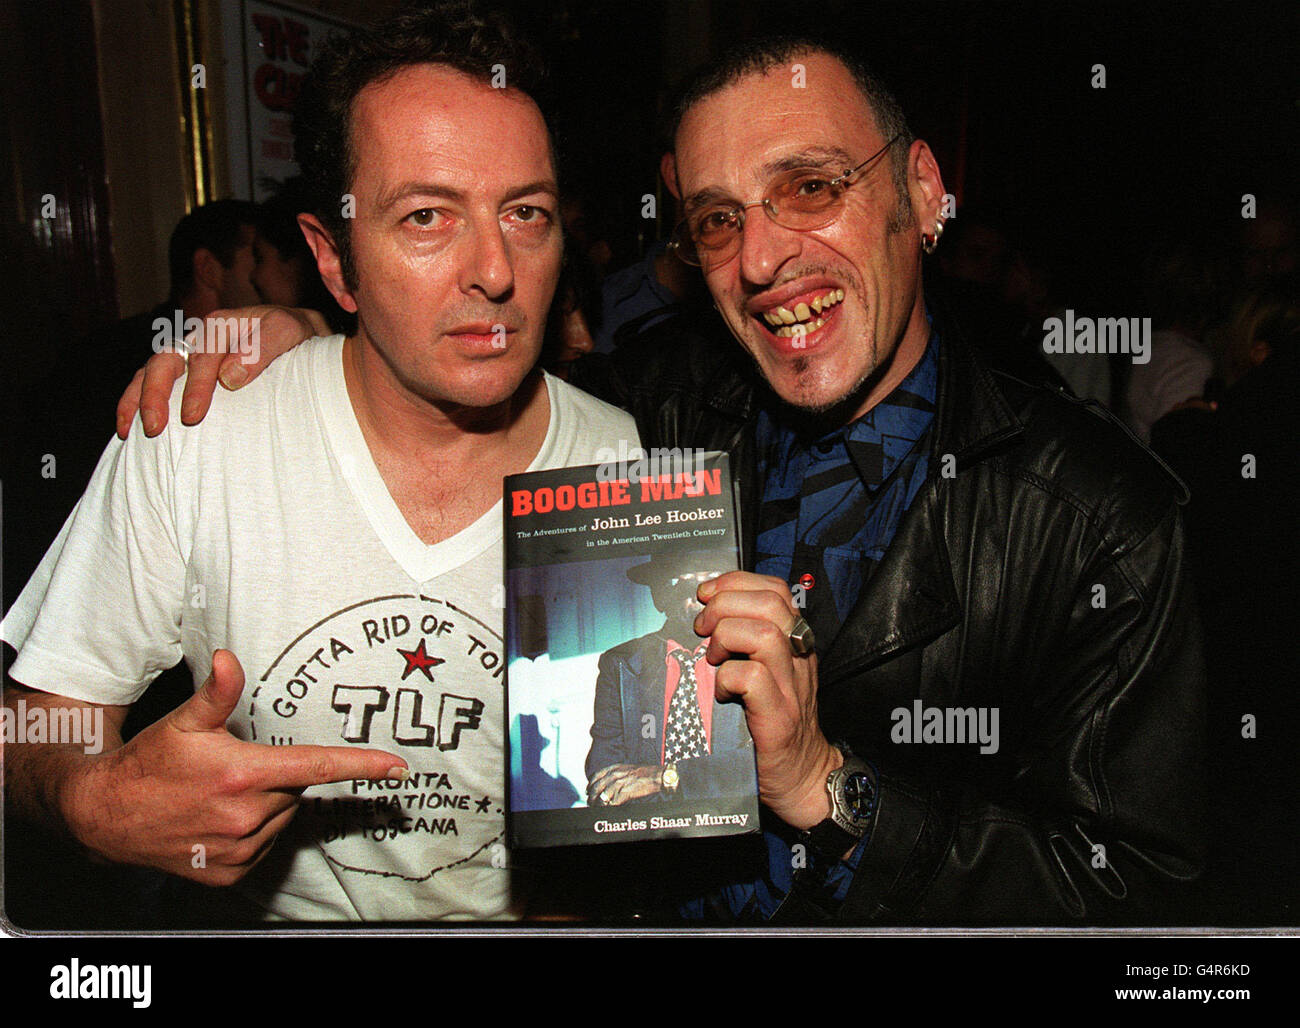 Joe Strummer (left), member of The Clash, and writer Charles Shaar Murray at the premiere of the BBC2 documentary 'Westway To The World' in Notting Hill in London. The film is about the career of the band, who split in 1986. Stock Photo